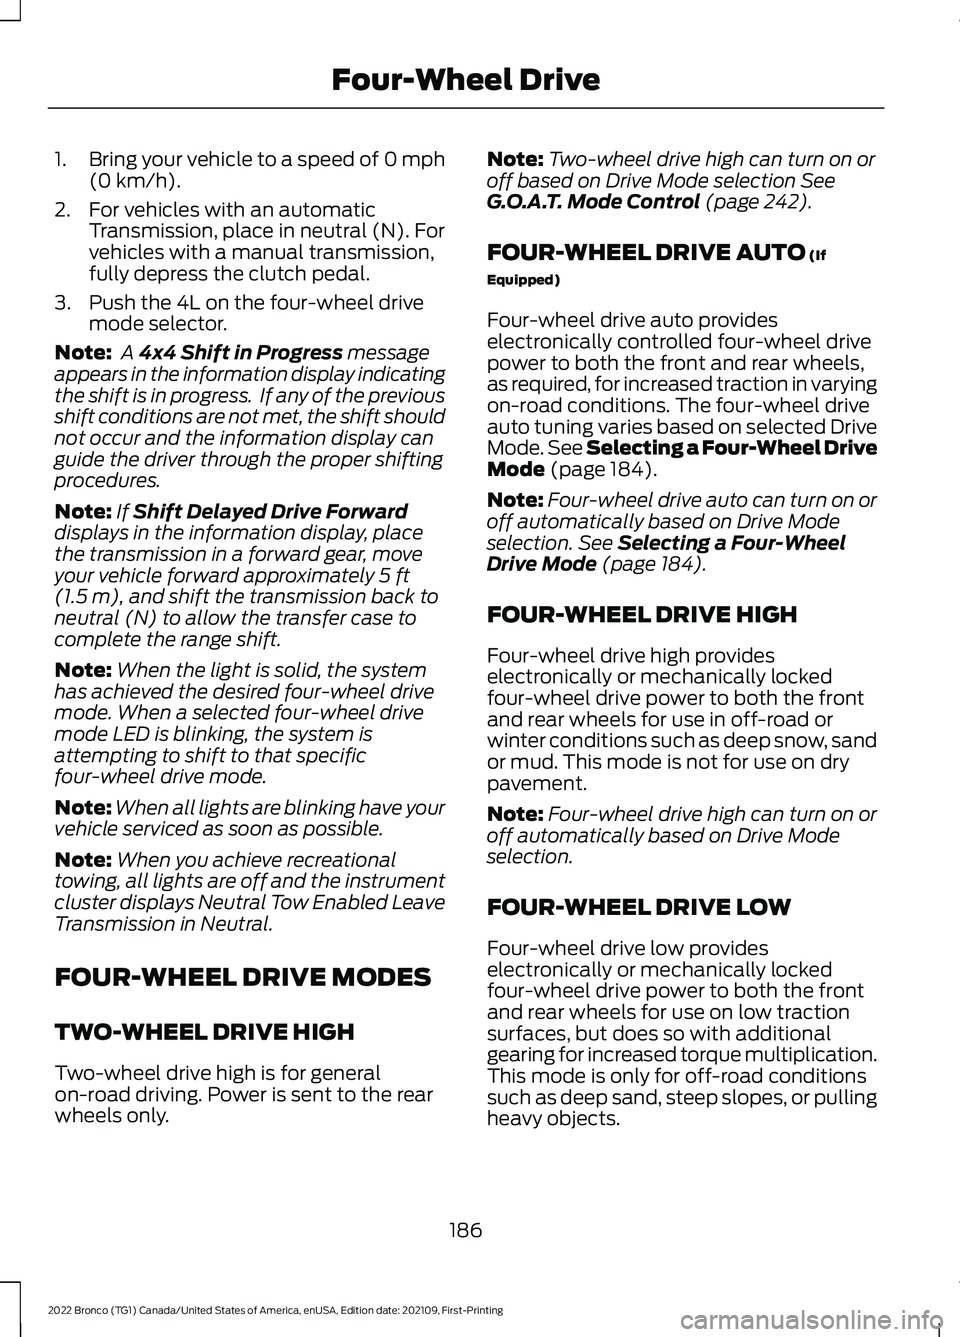 FORD BRONCO 2022 User Guide 1.Bring your vehicle to a speed of 0 mph(0 km/h).
2.For vehicles with an automaticTransmission, place in neutral (N). Forvehicles with a manual transmission,fully depress the clutch pedal.
3.Push the 